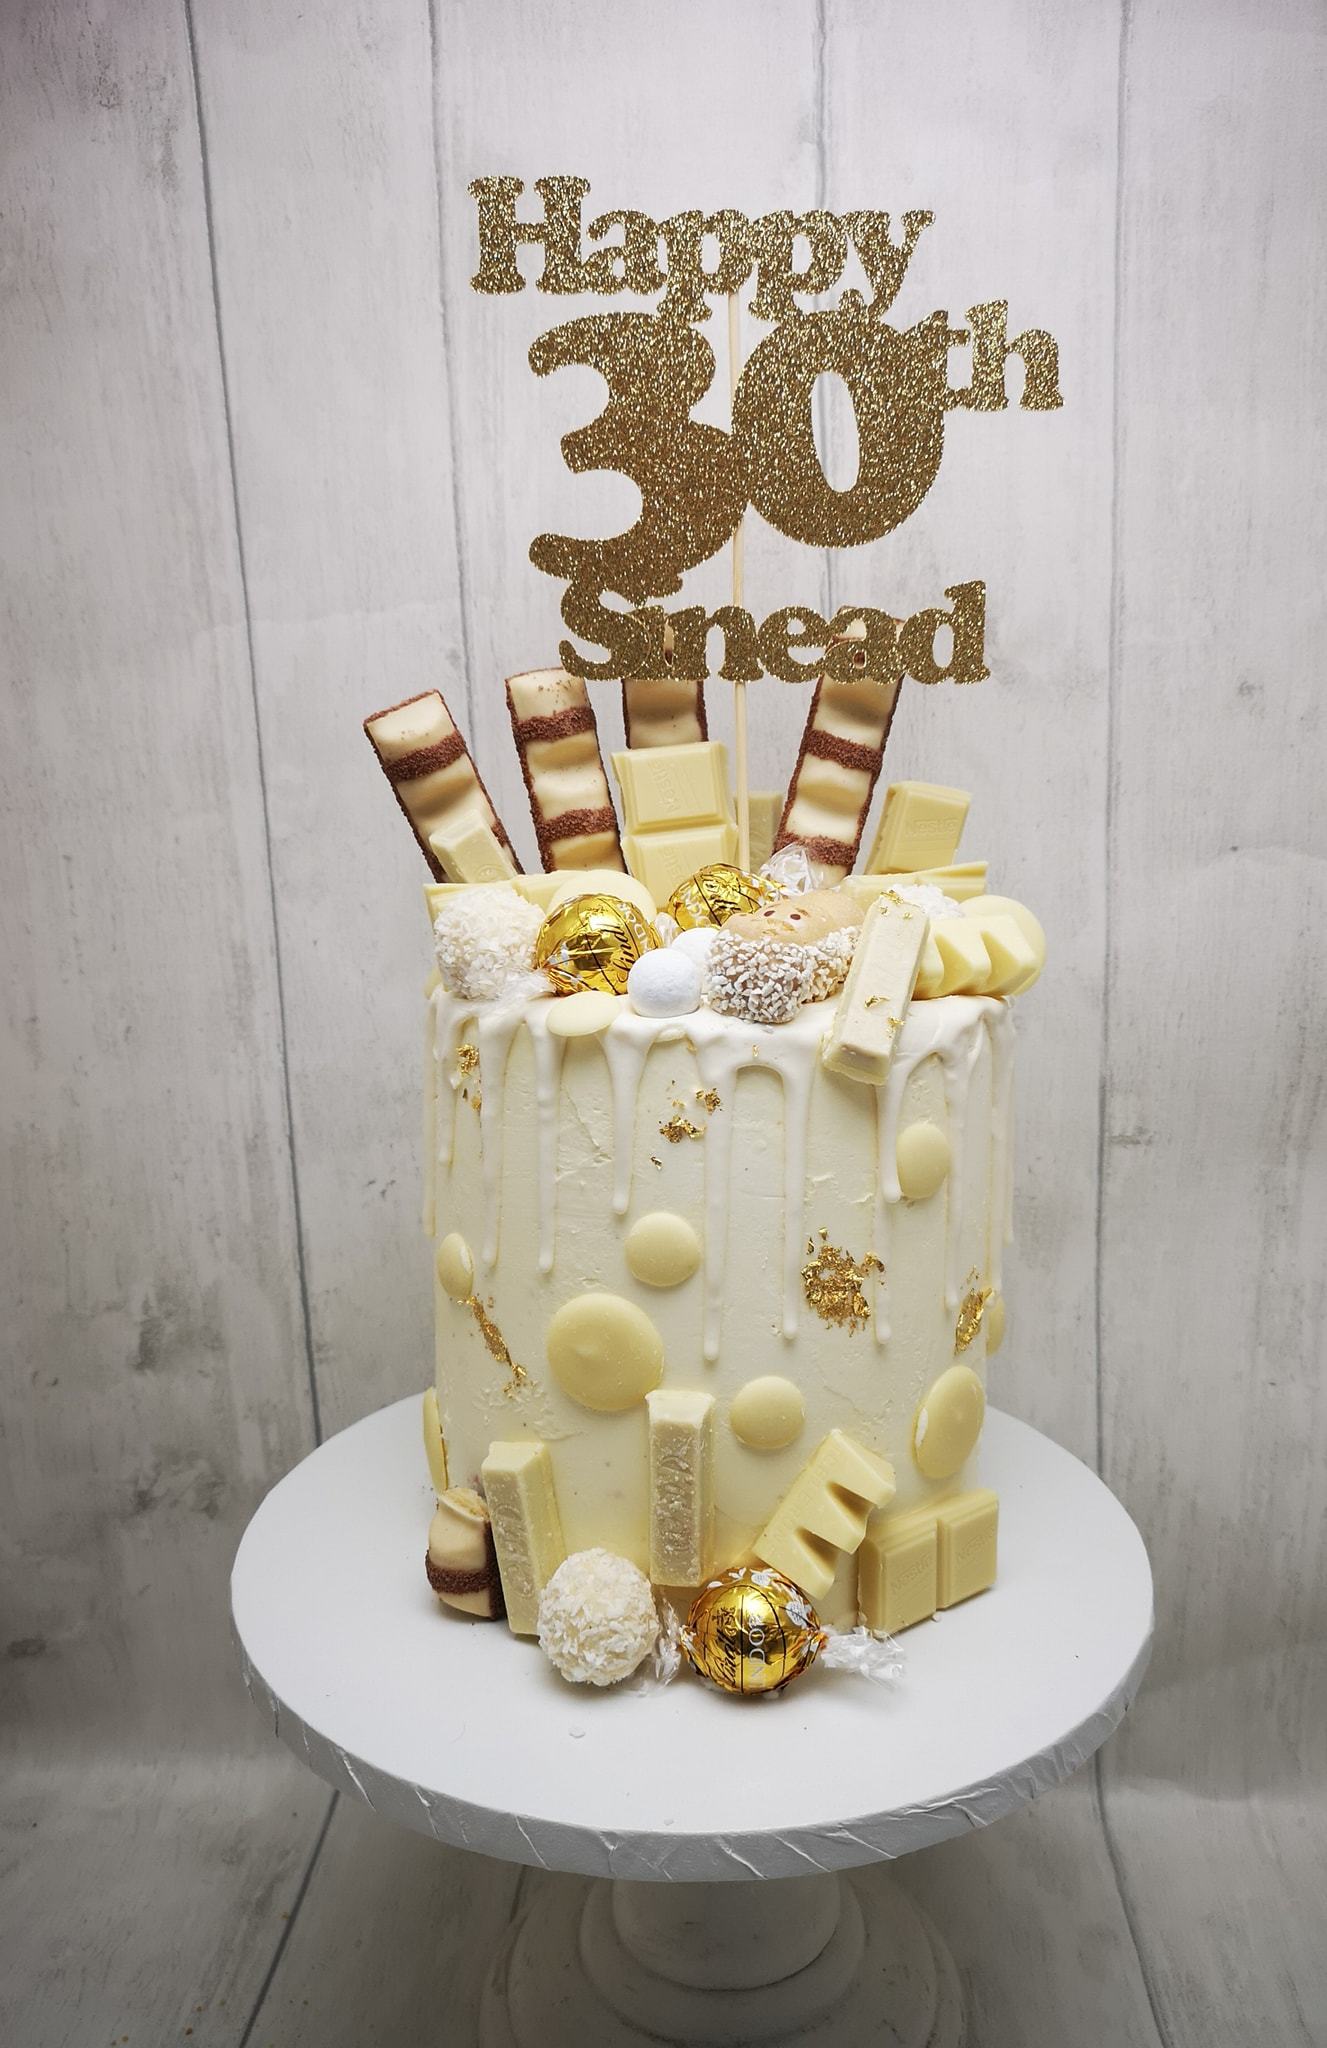 30th birthday cakes / 40th birthday Cakes: Must-See Ideas ...